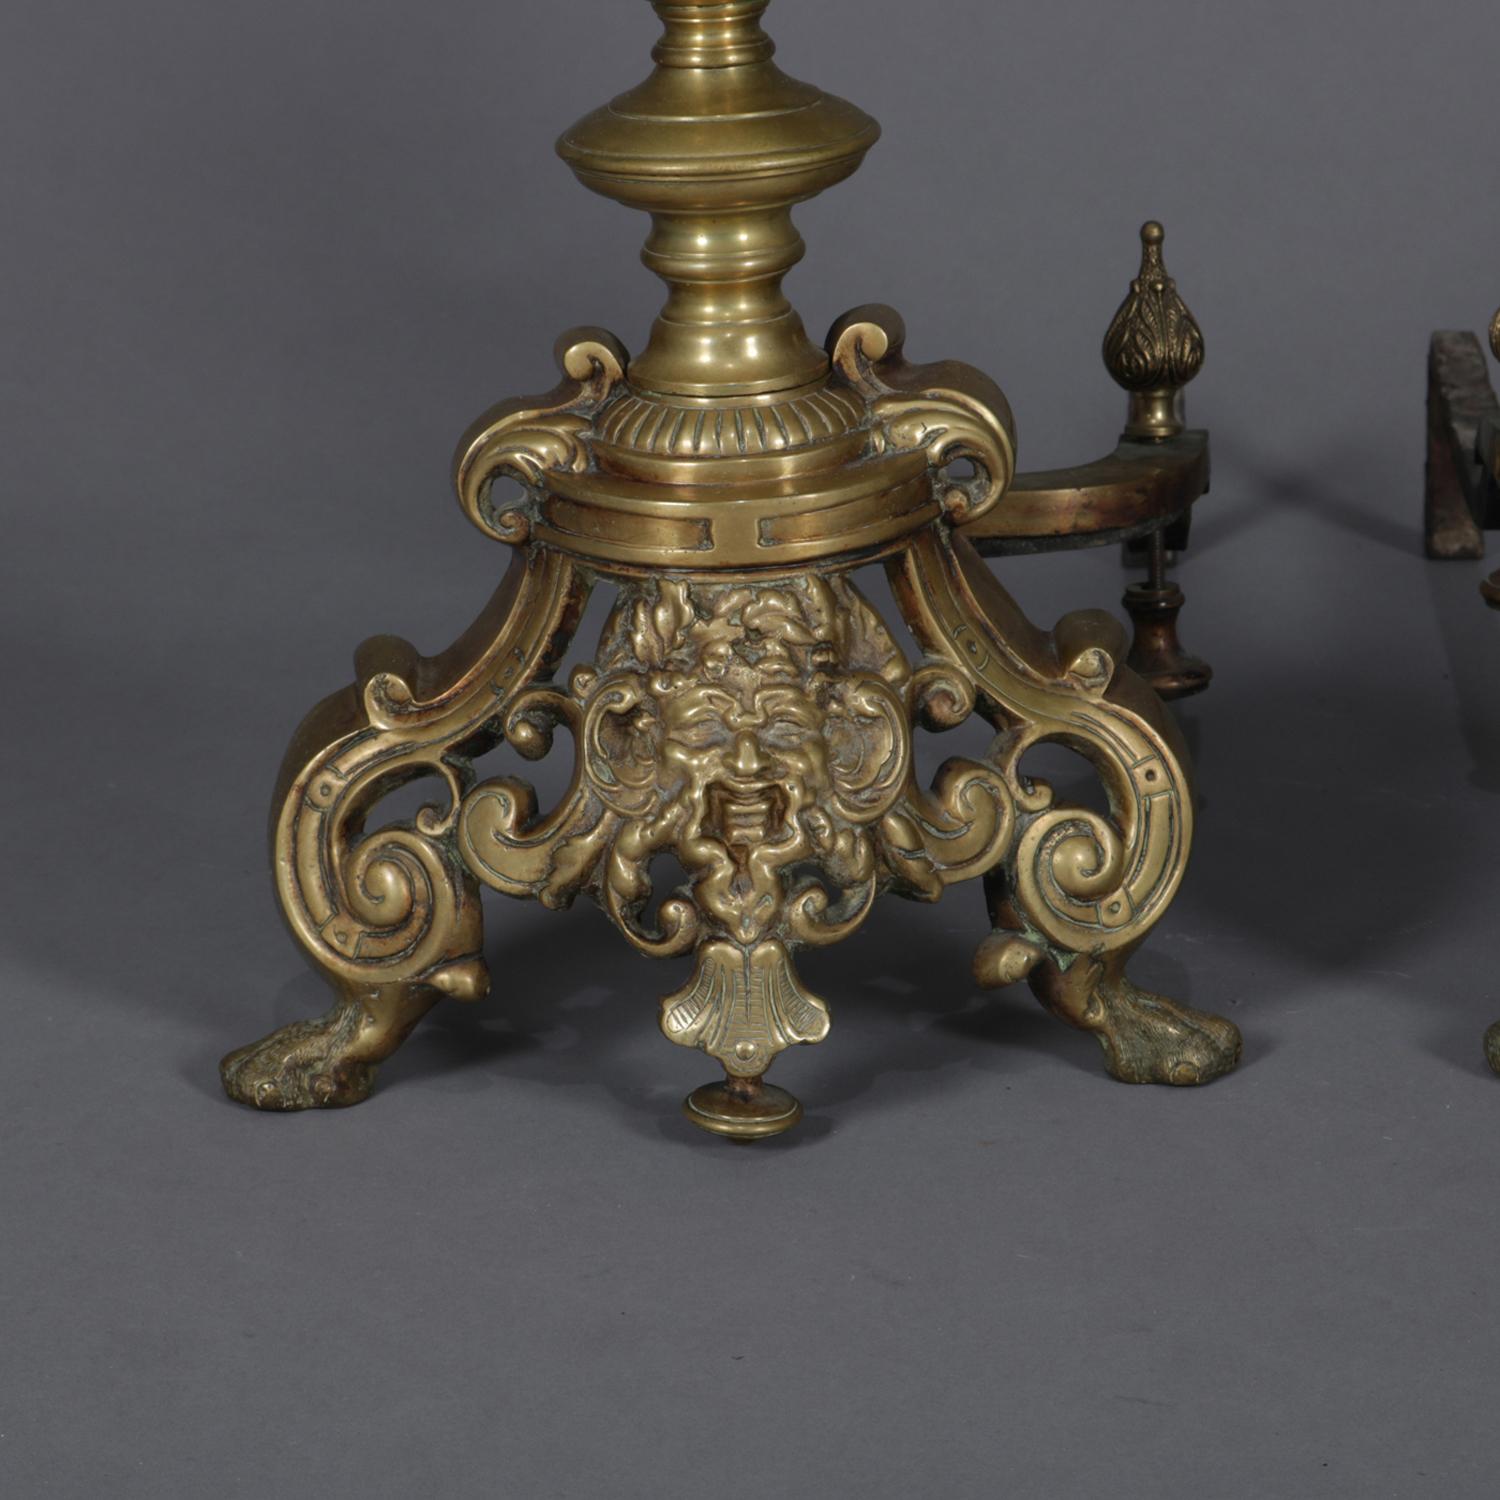 Cast Pair of Oversized French Baroque Brass Fireplace Chenet Andirons with Masks